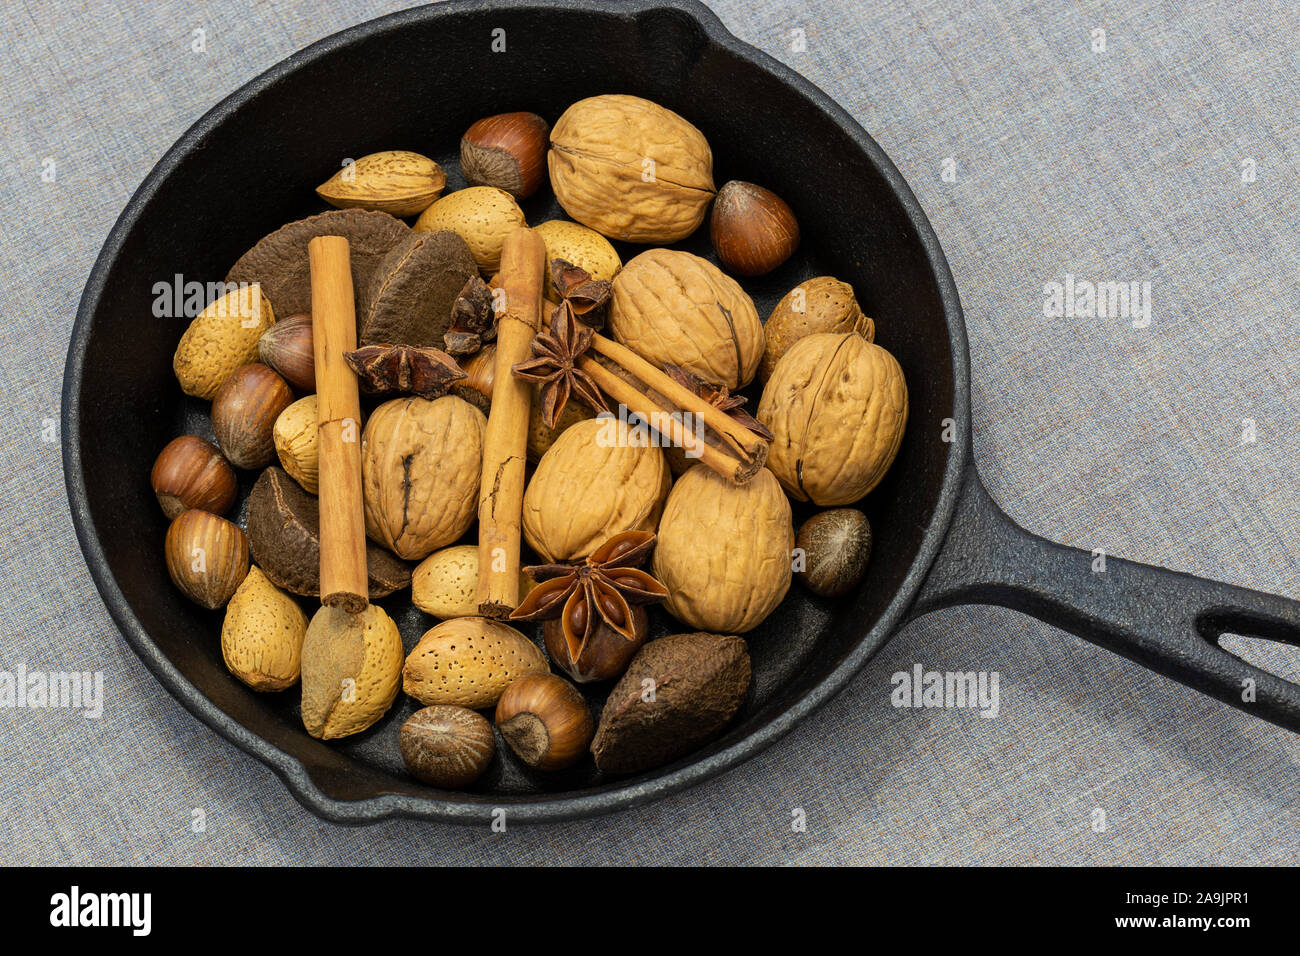 Walnuts, hazelnuts, Brazil nuts and walnuts in a cast iron frying pan with cinnamon sticks and star anise.  On a grey tablecloth Stock Photo